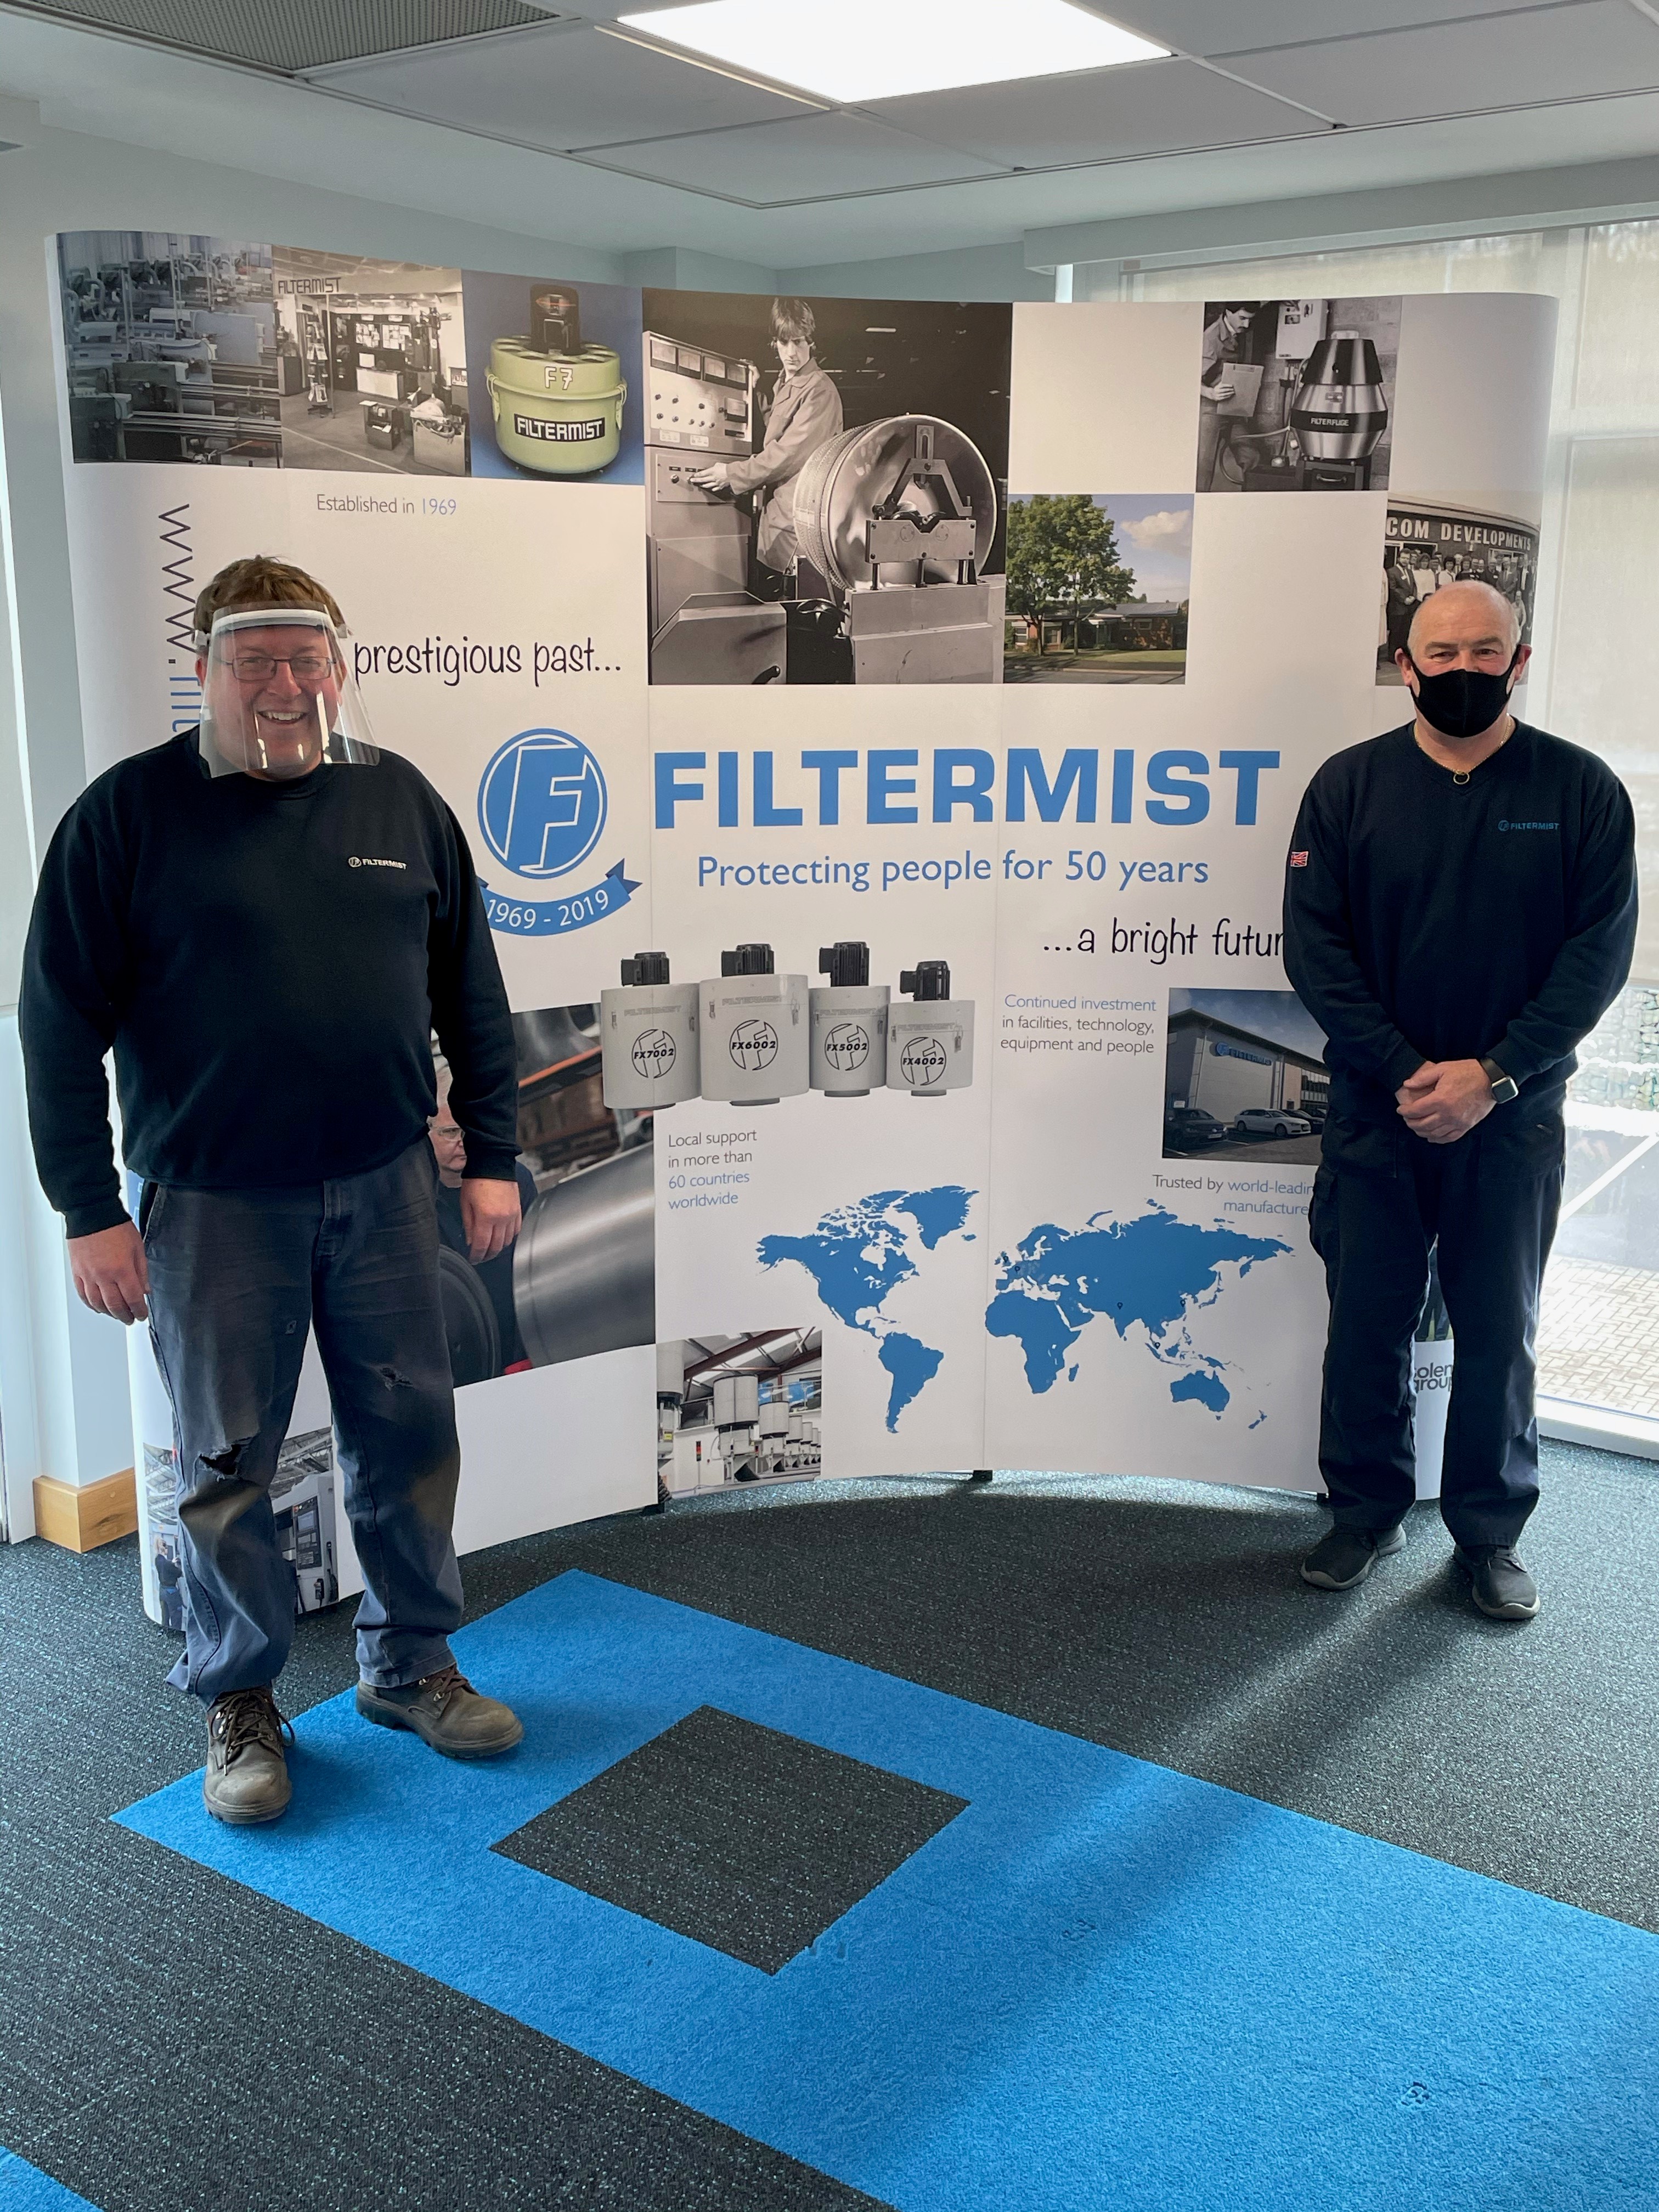 25-year milestone for two Filtermist colleagues